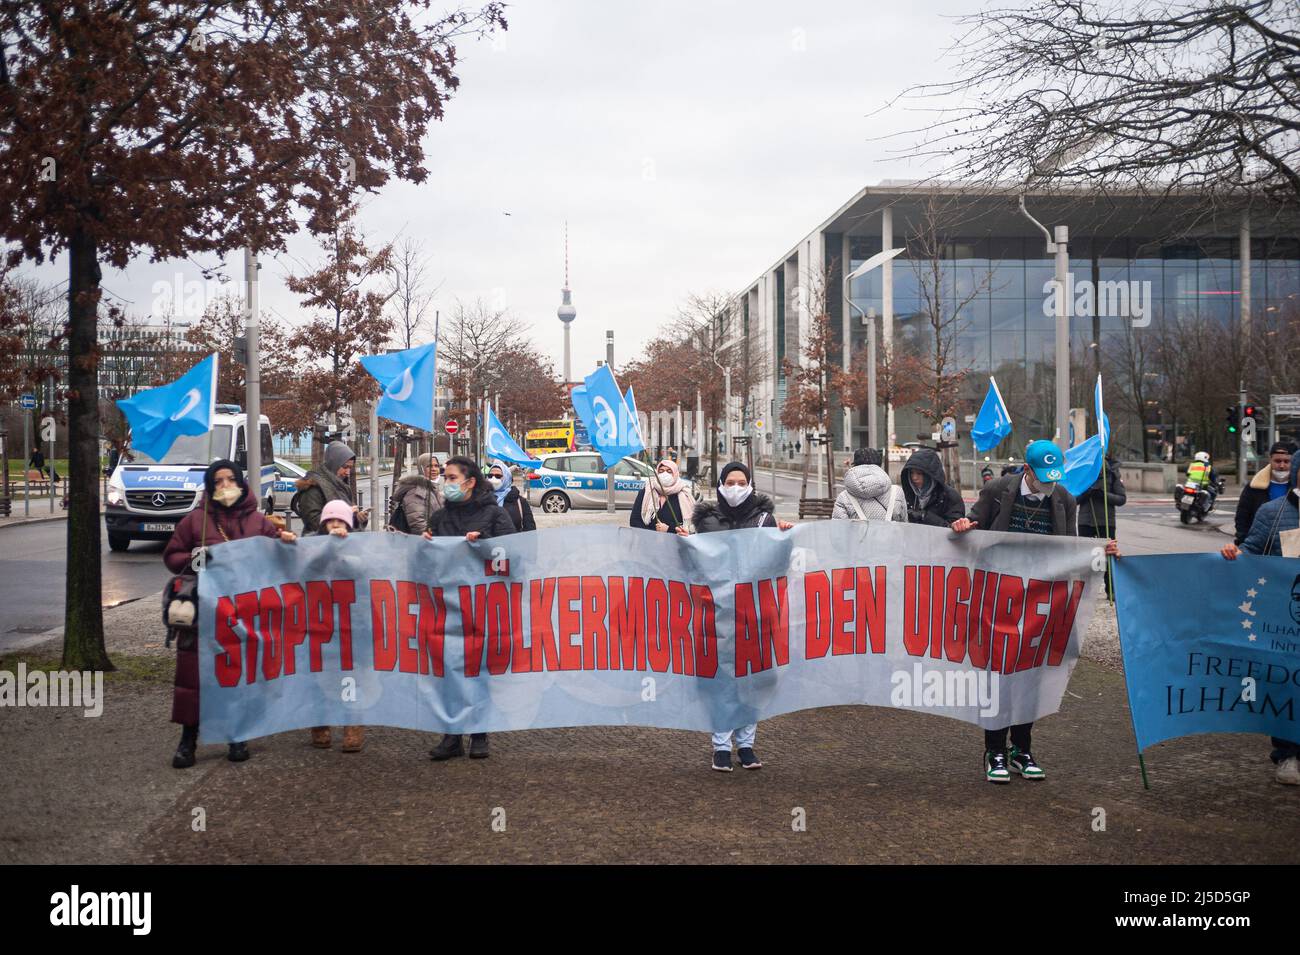 Jan. 29, 2022, Berlin, Germany, Europe - Demonstrators carrying banners, protest placards and flags protest the genocide of Uighurs in the Chinese autonomous region of Xinjiang and respect for human rights and call for a diplomatic boycott of the 2022 Winter Olympics in Beijing at a rally in front of the German Chancellor's Office in the Berlin-Mitte district. [automated translation] Stock Photo